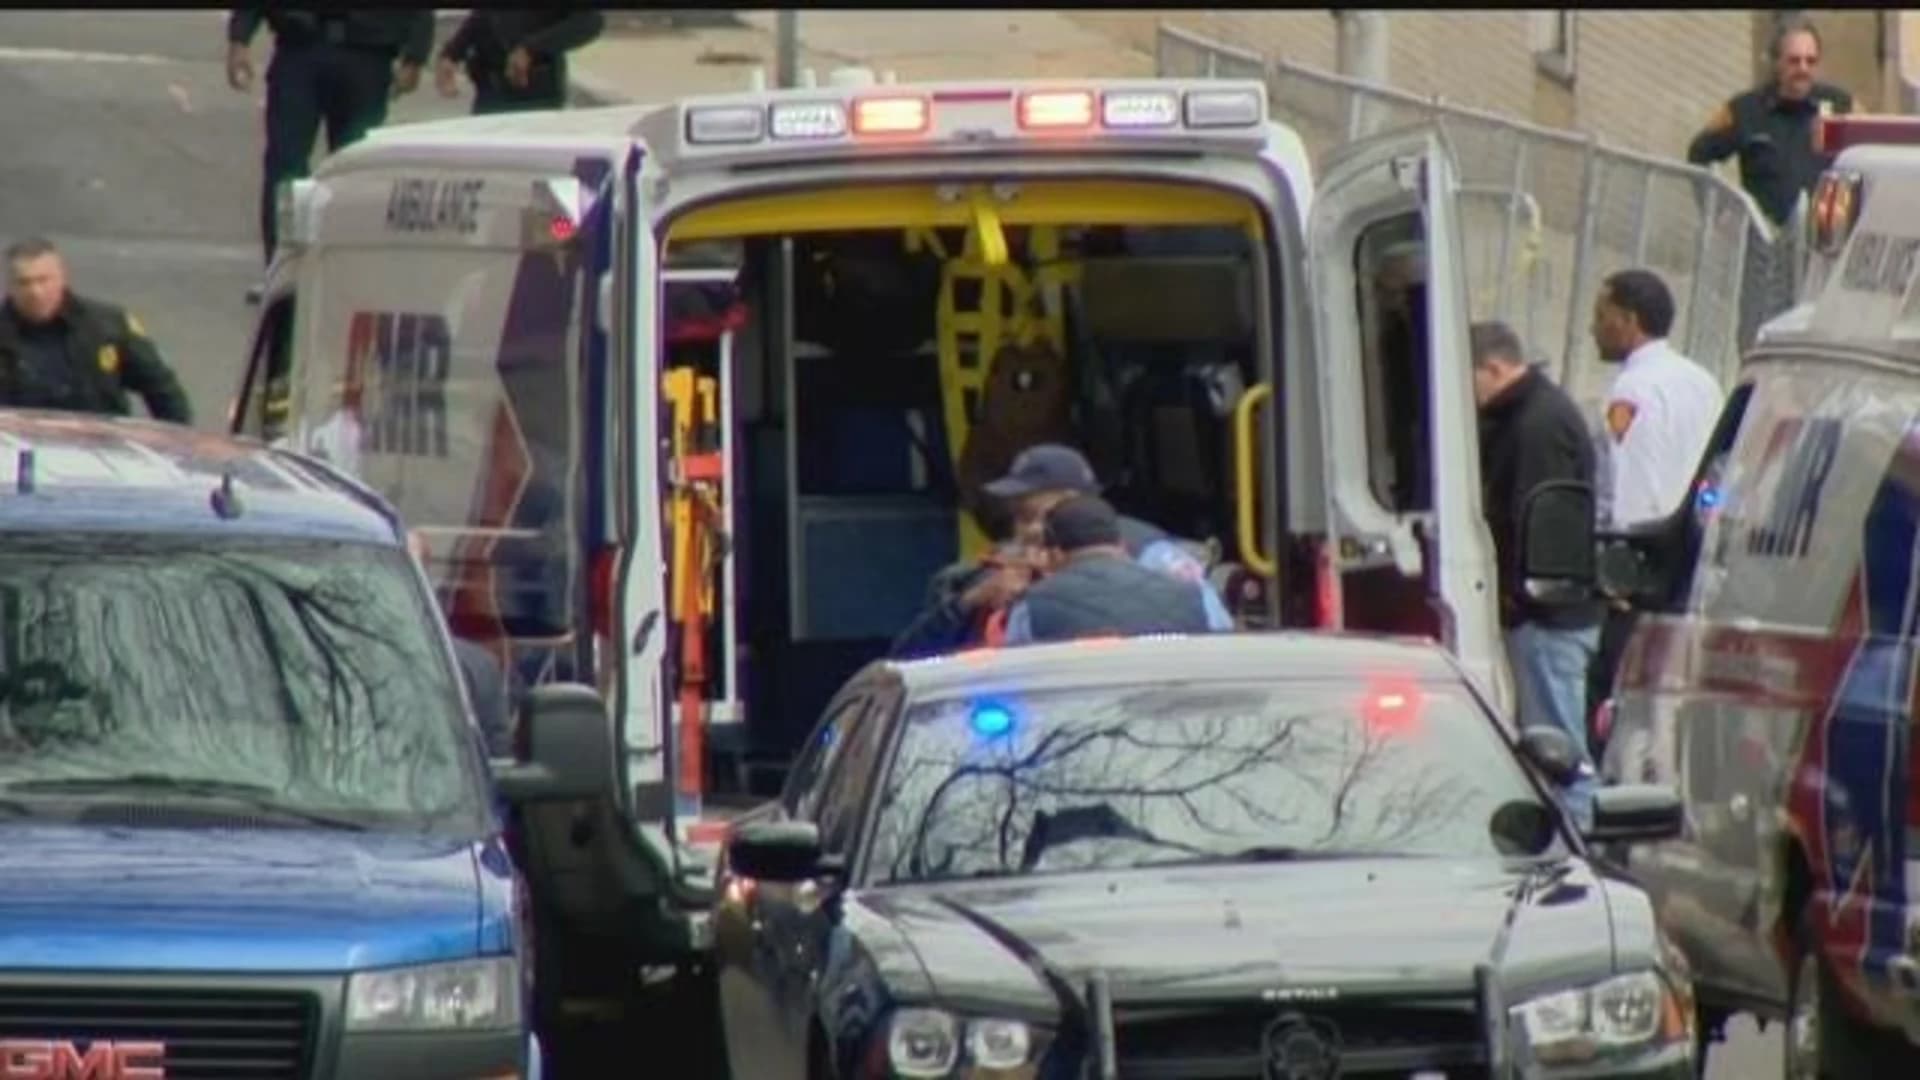 1 victim remains in intensive care after Bridgeport courthouse shooting